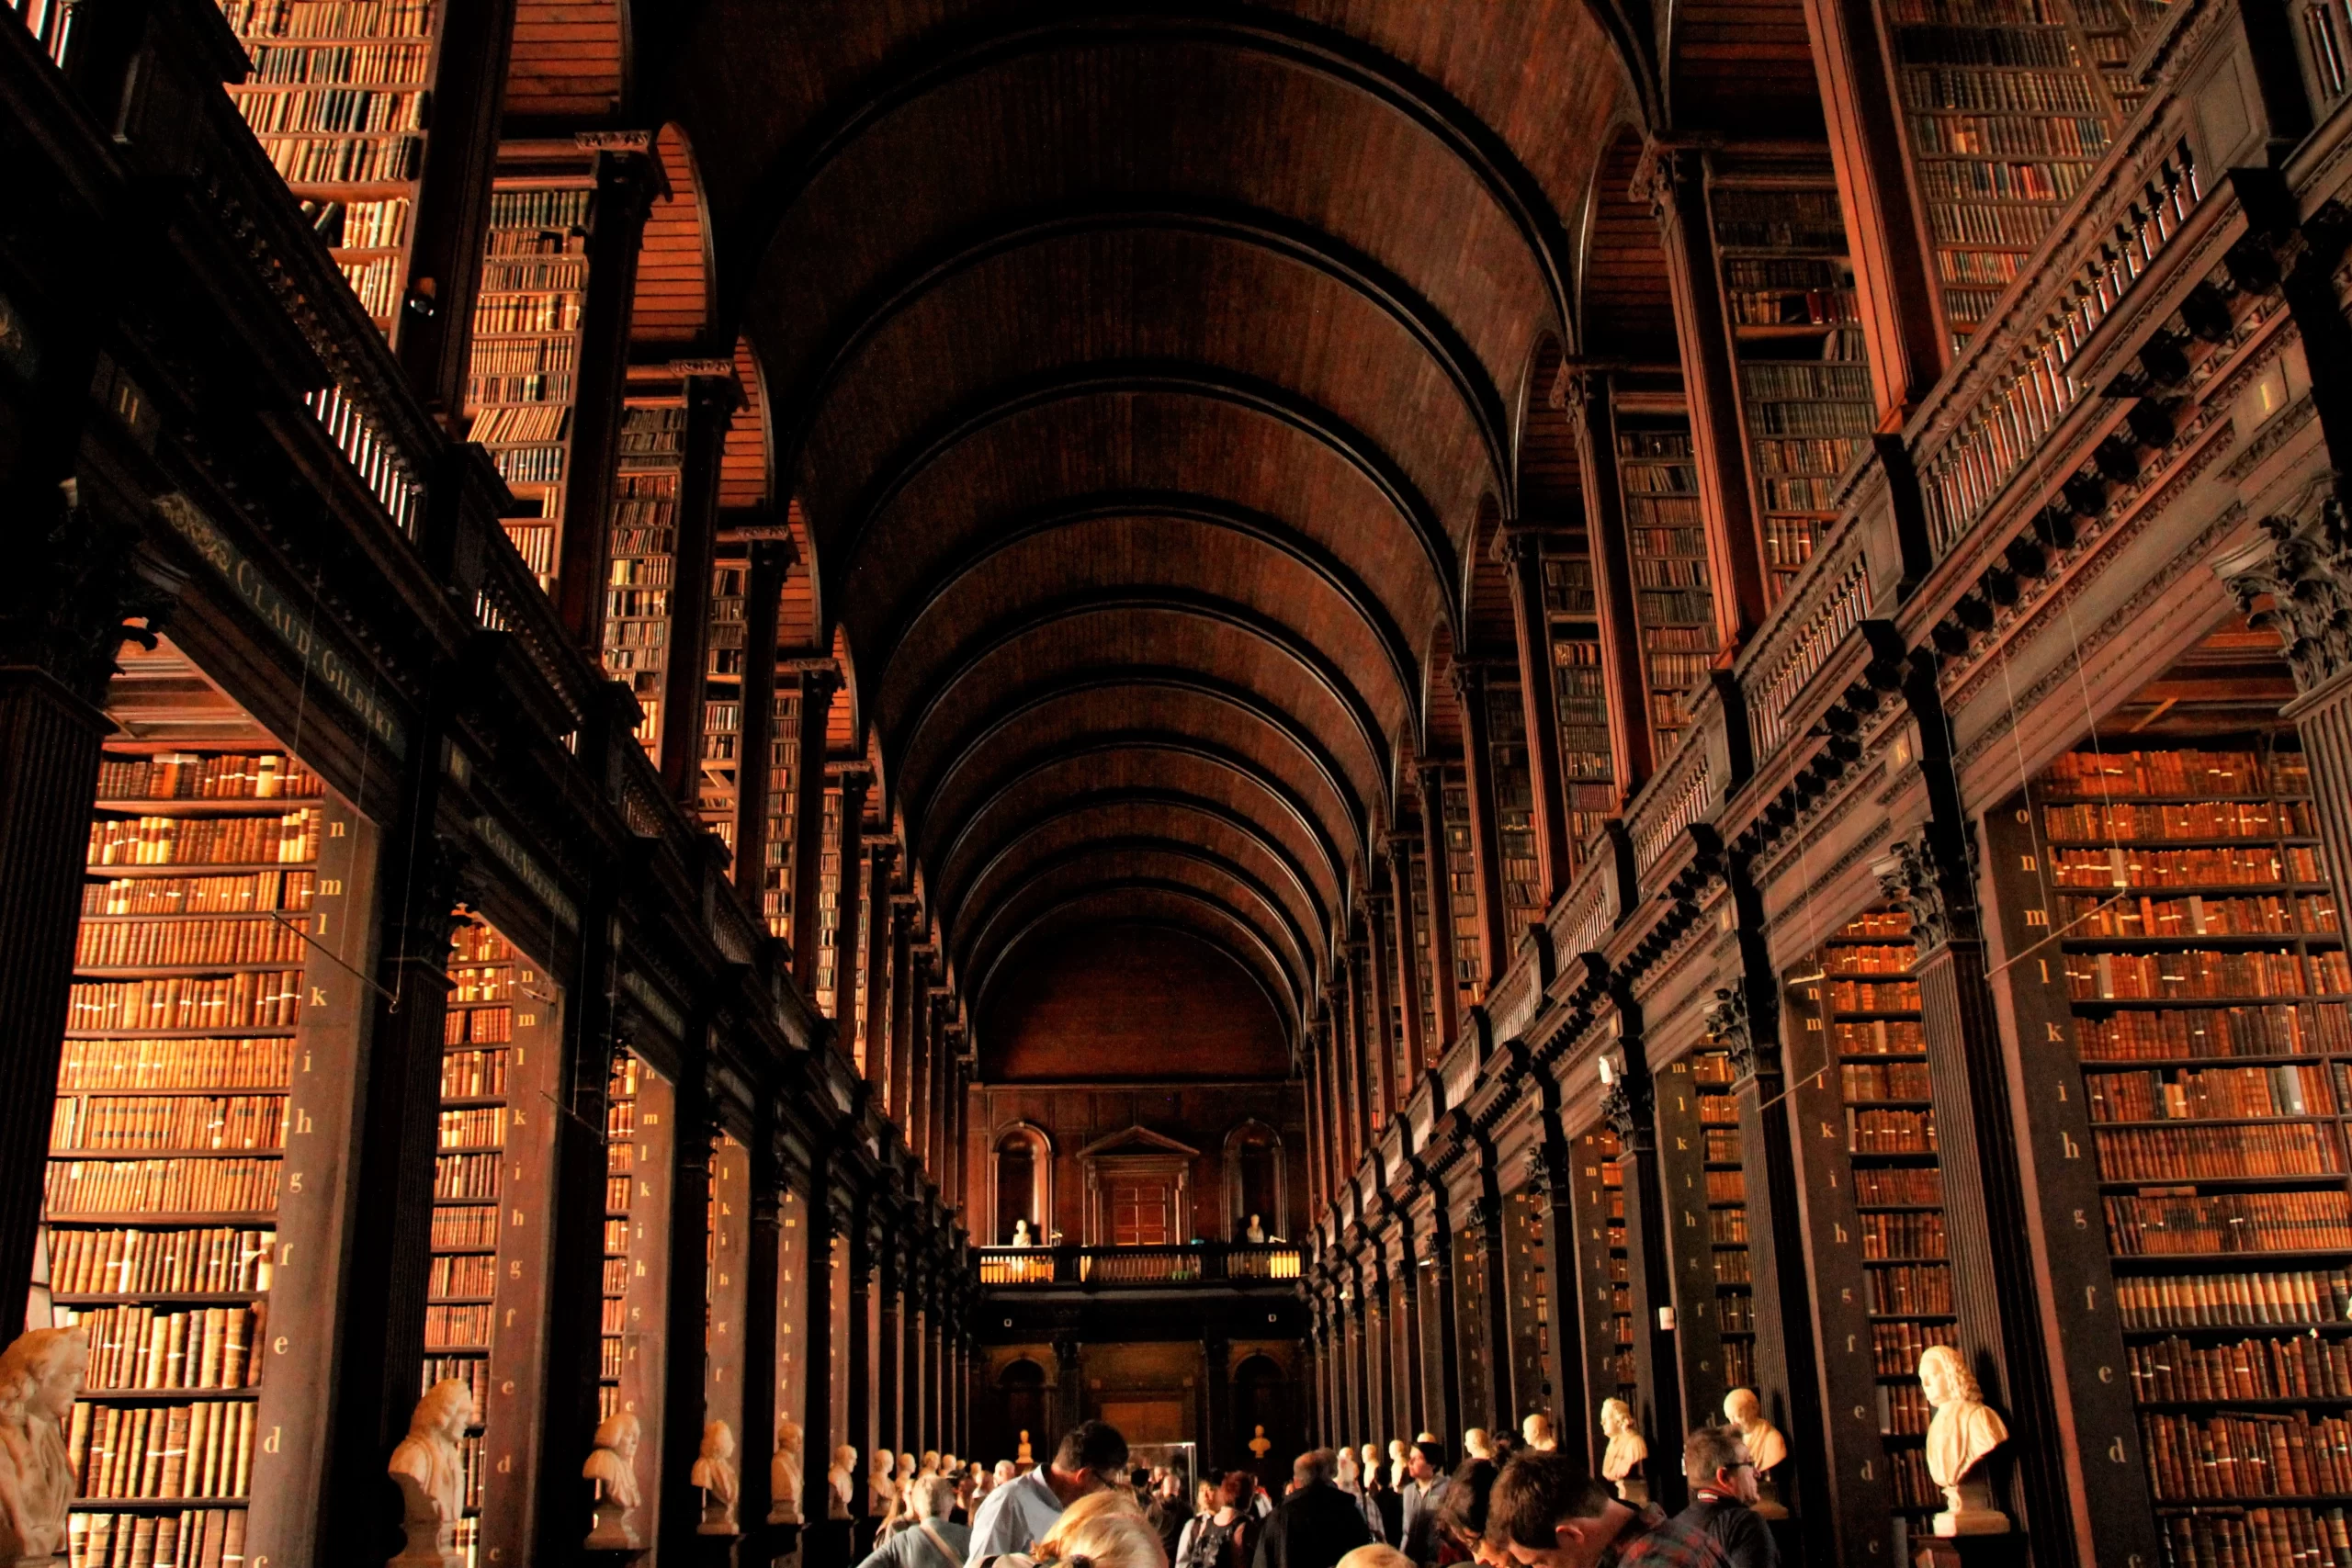 Trinity College, Dublin, Ireland Published on October 29, 2017 Canon, EOS REBEL T3i Free to use under the Unsplash License